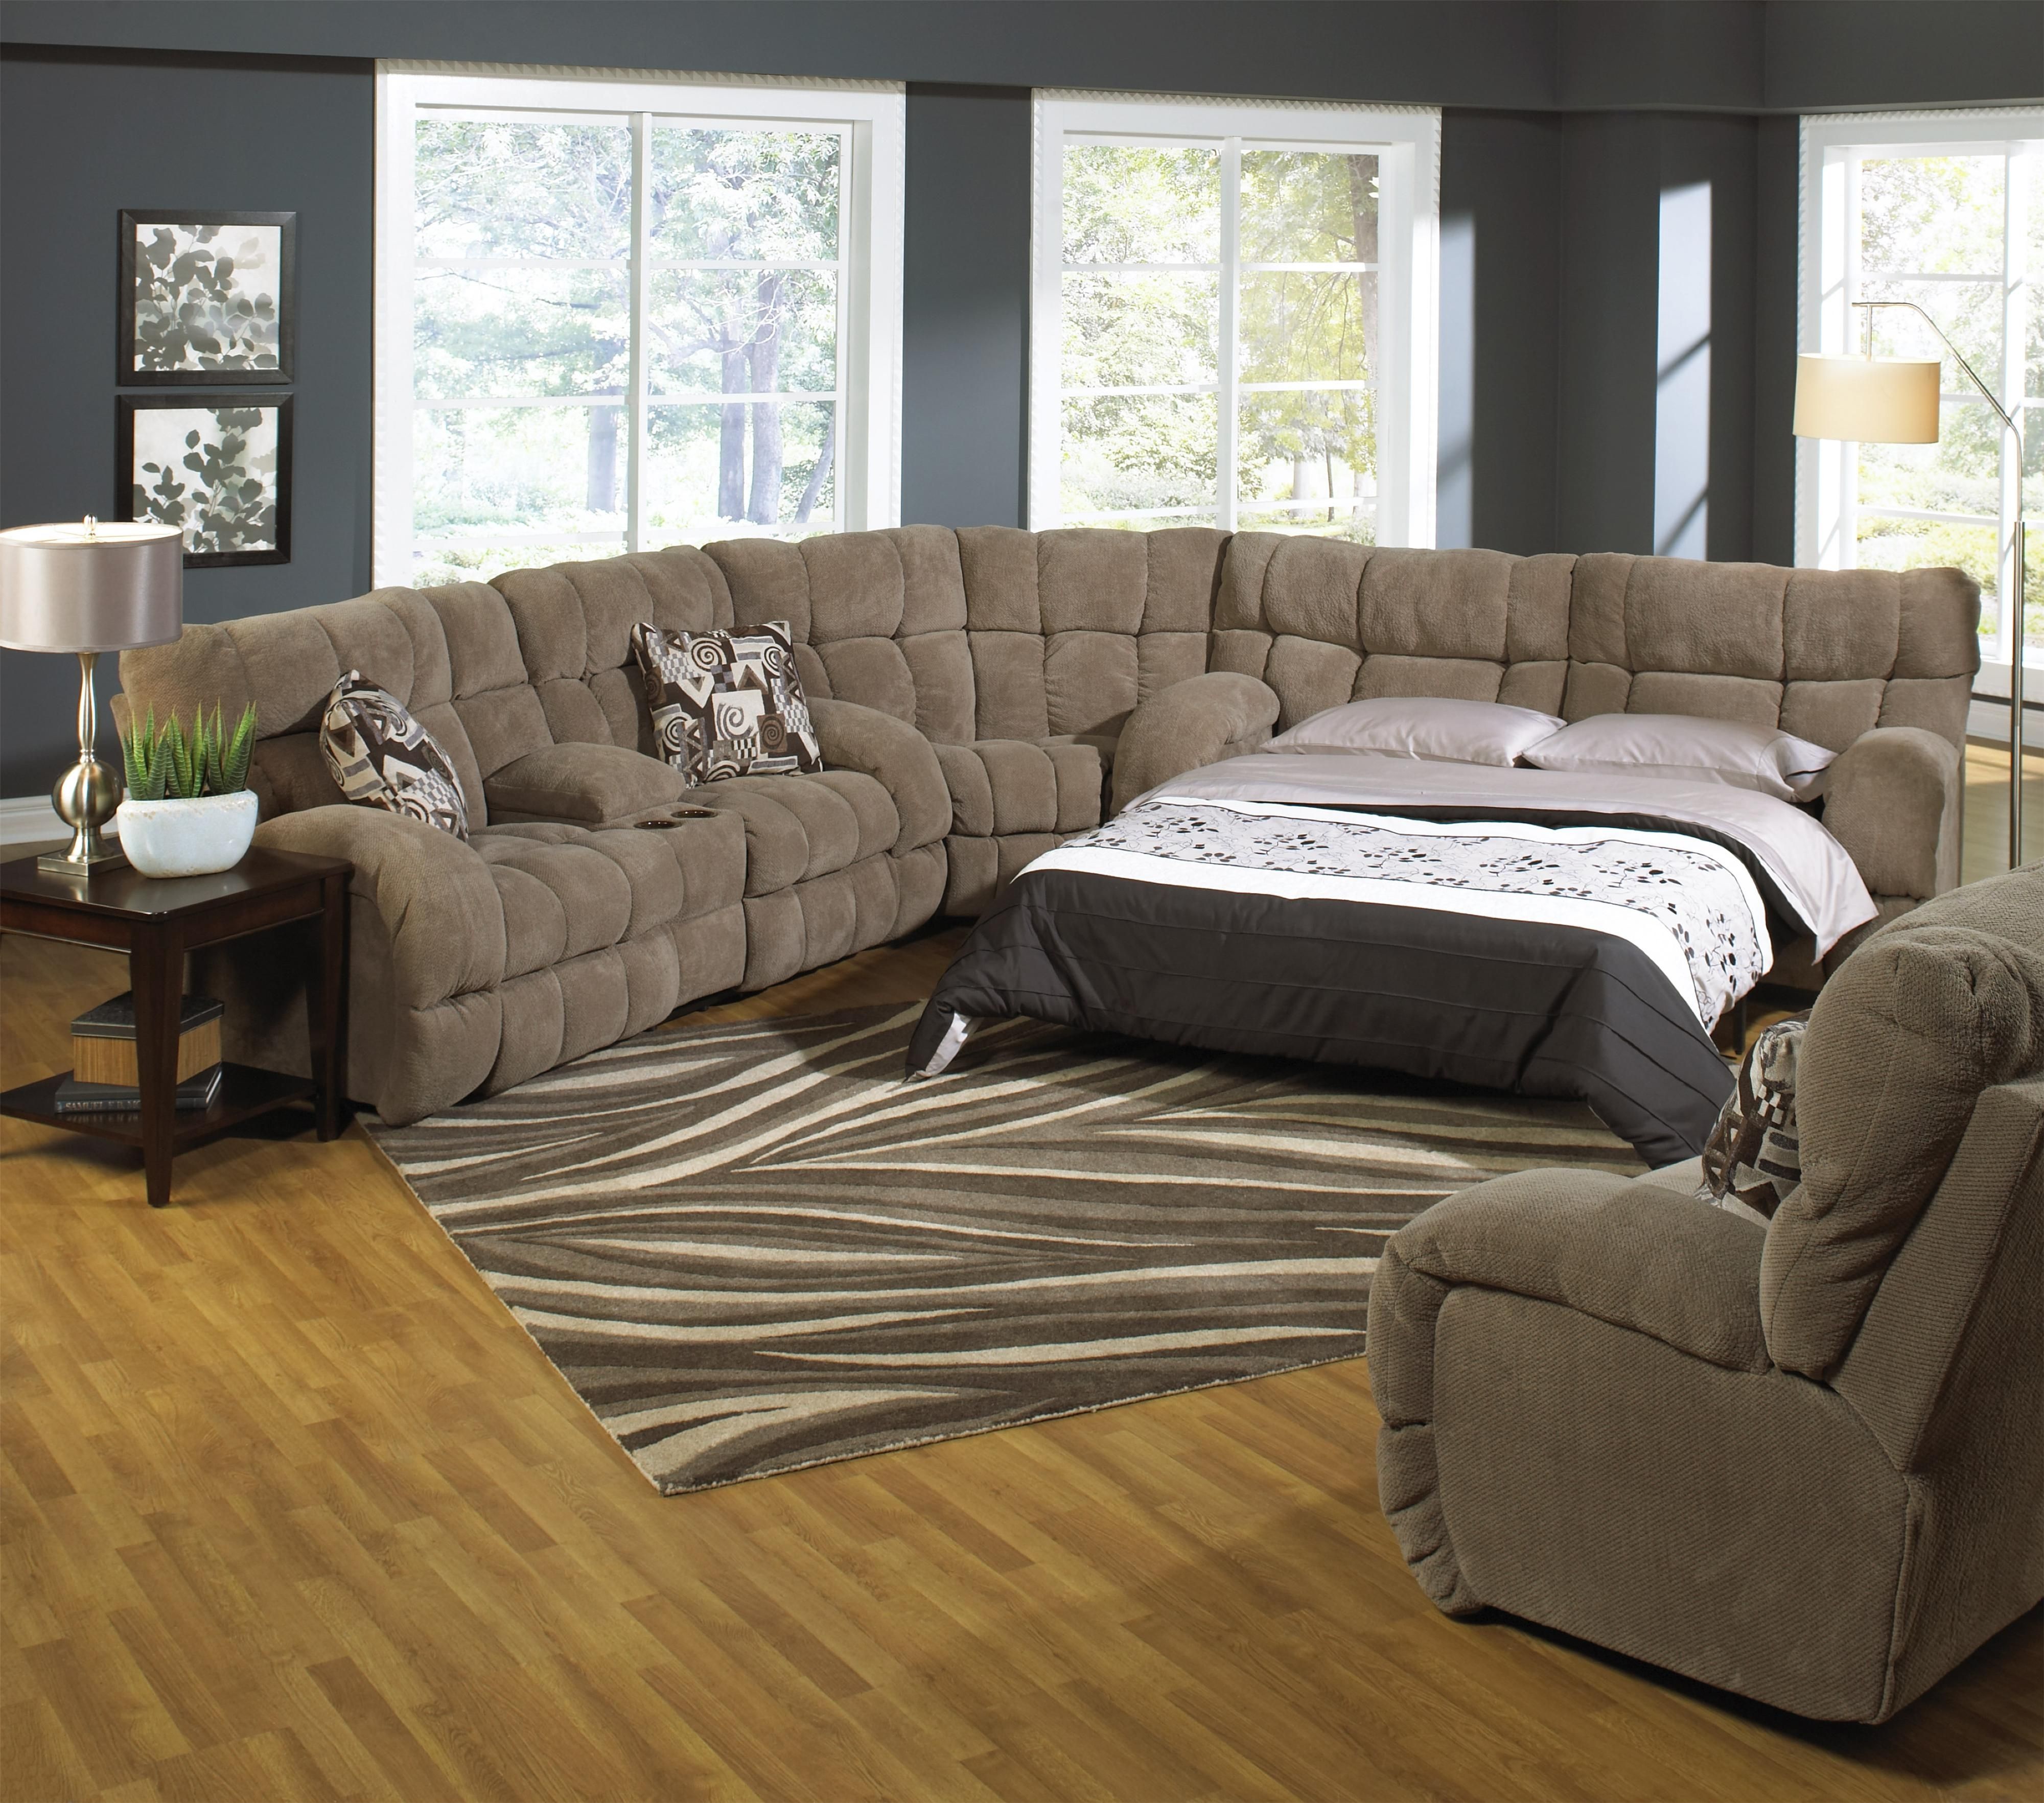 Reclining Sectional Sofa With Sofa Sleepercatnapper | Wolf And With Sectional Sofas With Sleeper (Photo 1 of 10)